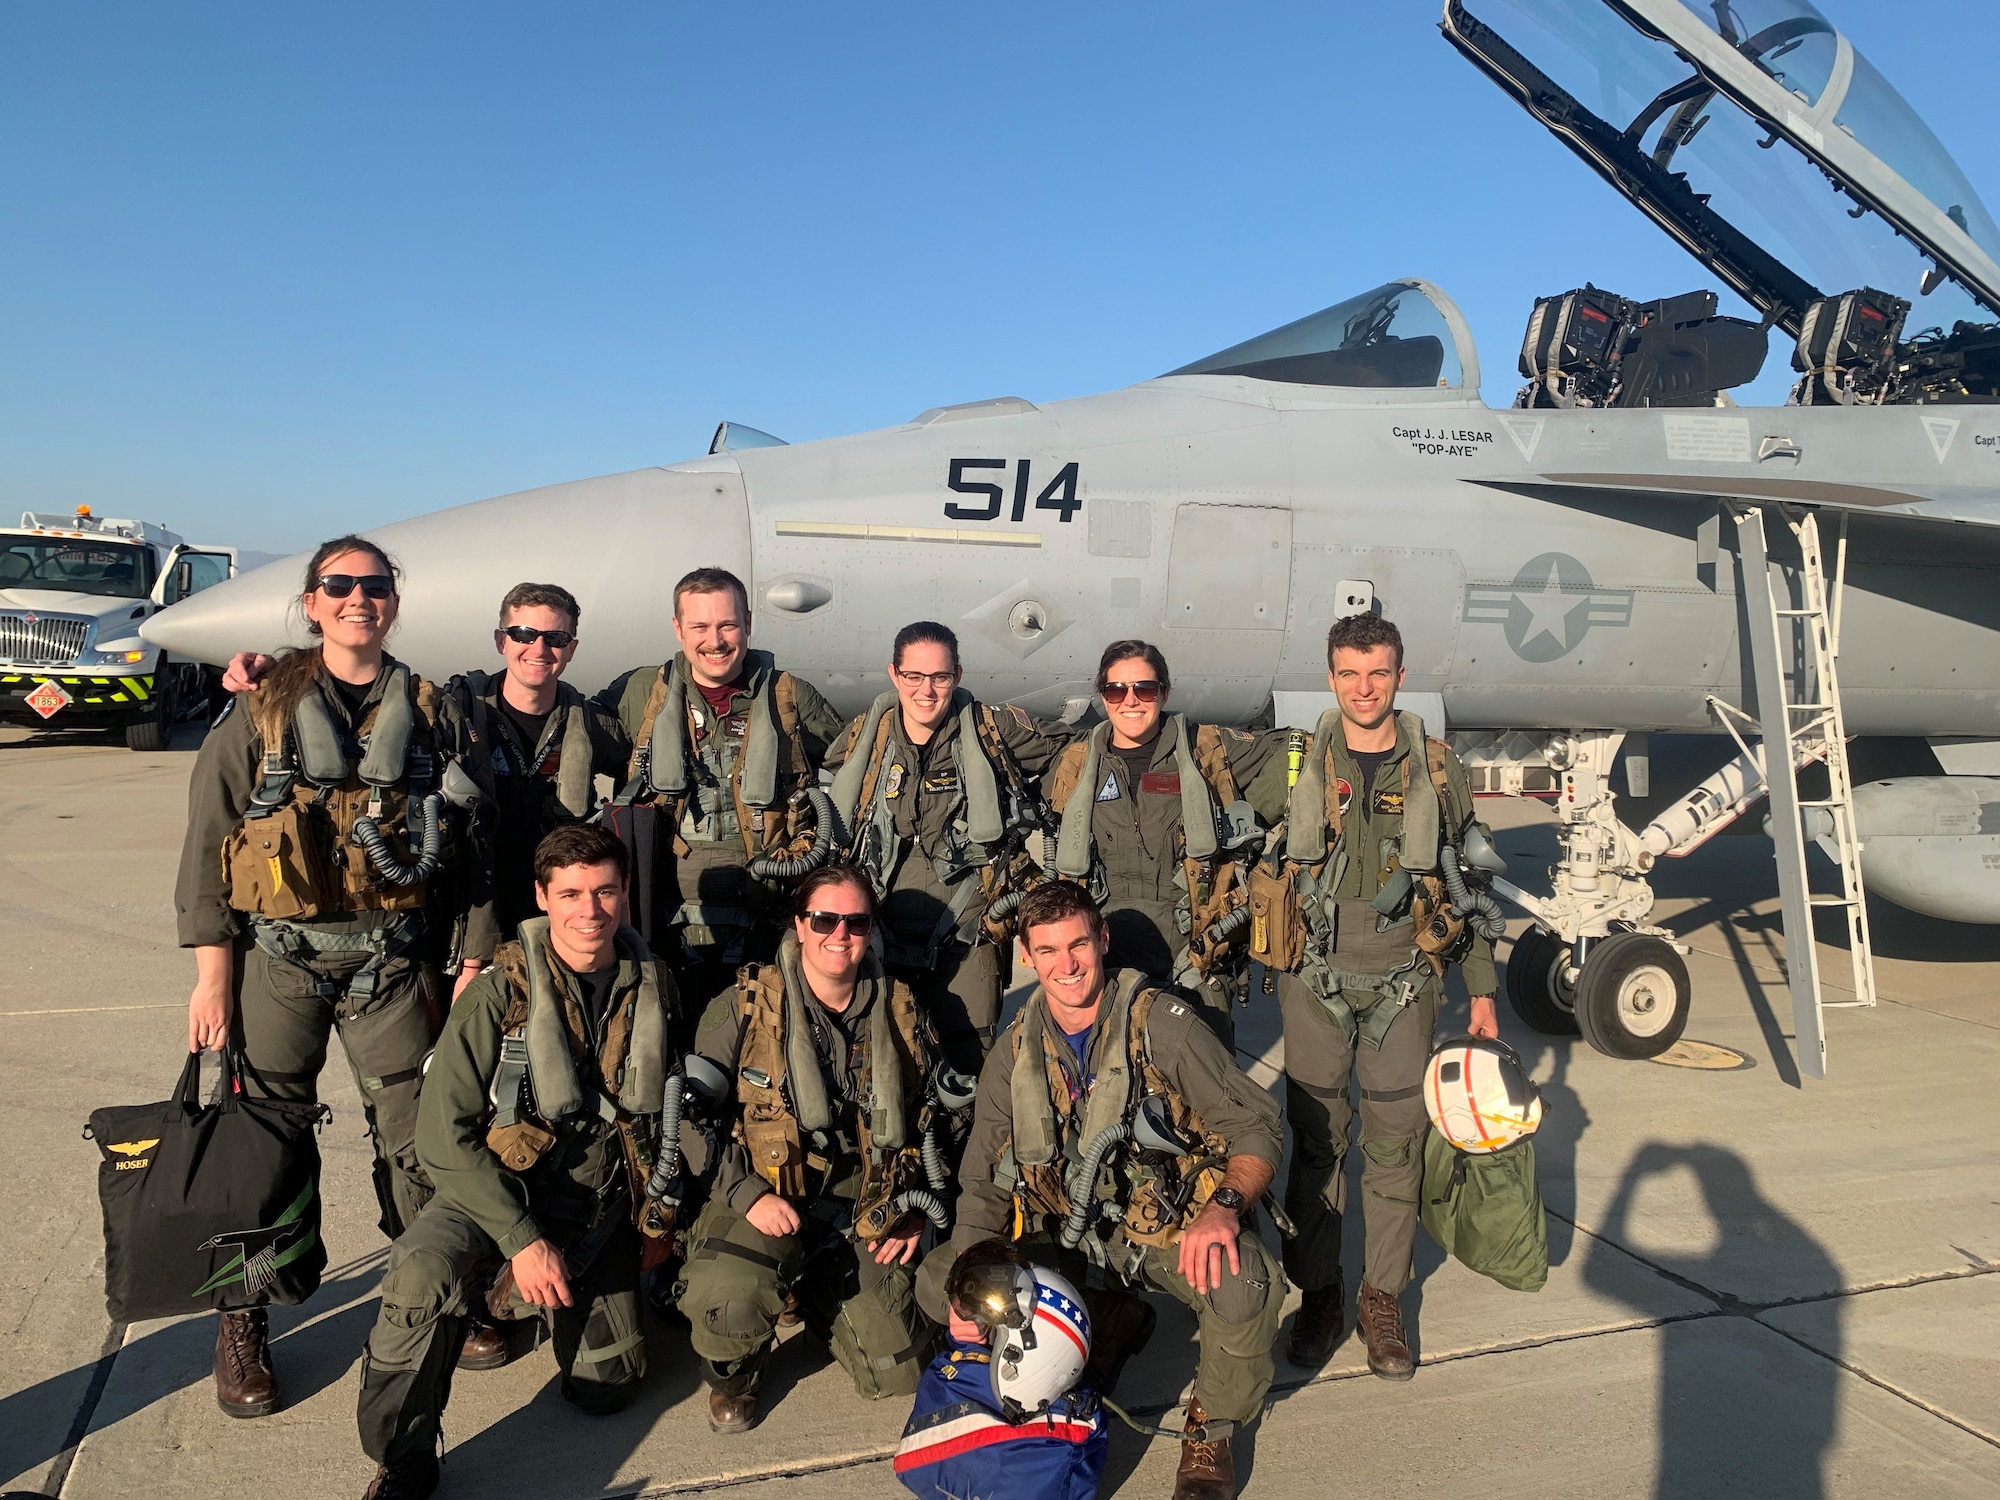 U.S. Air Force Capt. Aaron “Brutus” Tindall, 390th Electronic Combat Squadron EA-18G weapons officer, poses with naval aircrew and electronic warfare officers Oct. 29, 2020, at the Point Mugu Naval Air Station, California. Tindall is the first Airman to graduate from the Navy’s Airborne Electronic Attack weapons school, making him a subject matter expert in AEA and the EA-18G Growler.